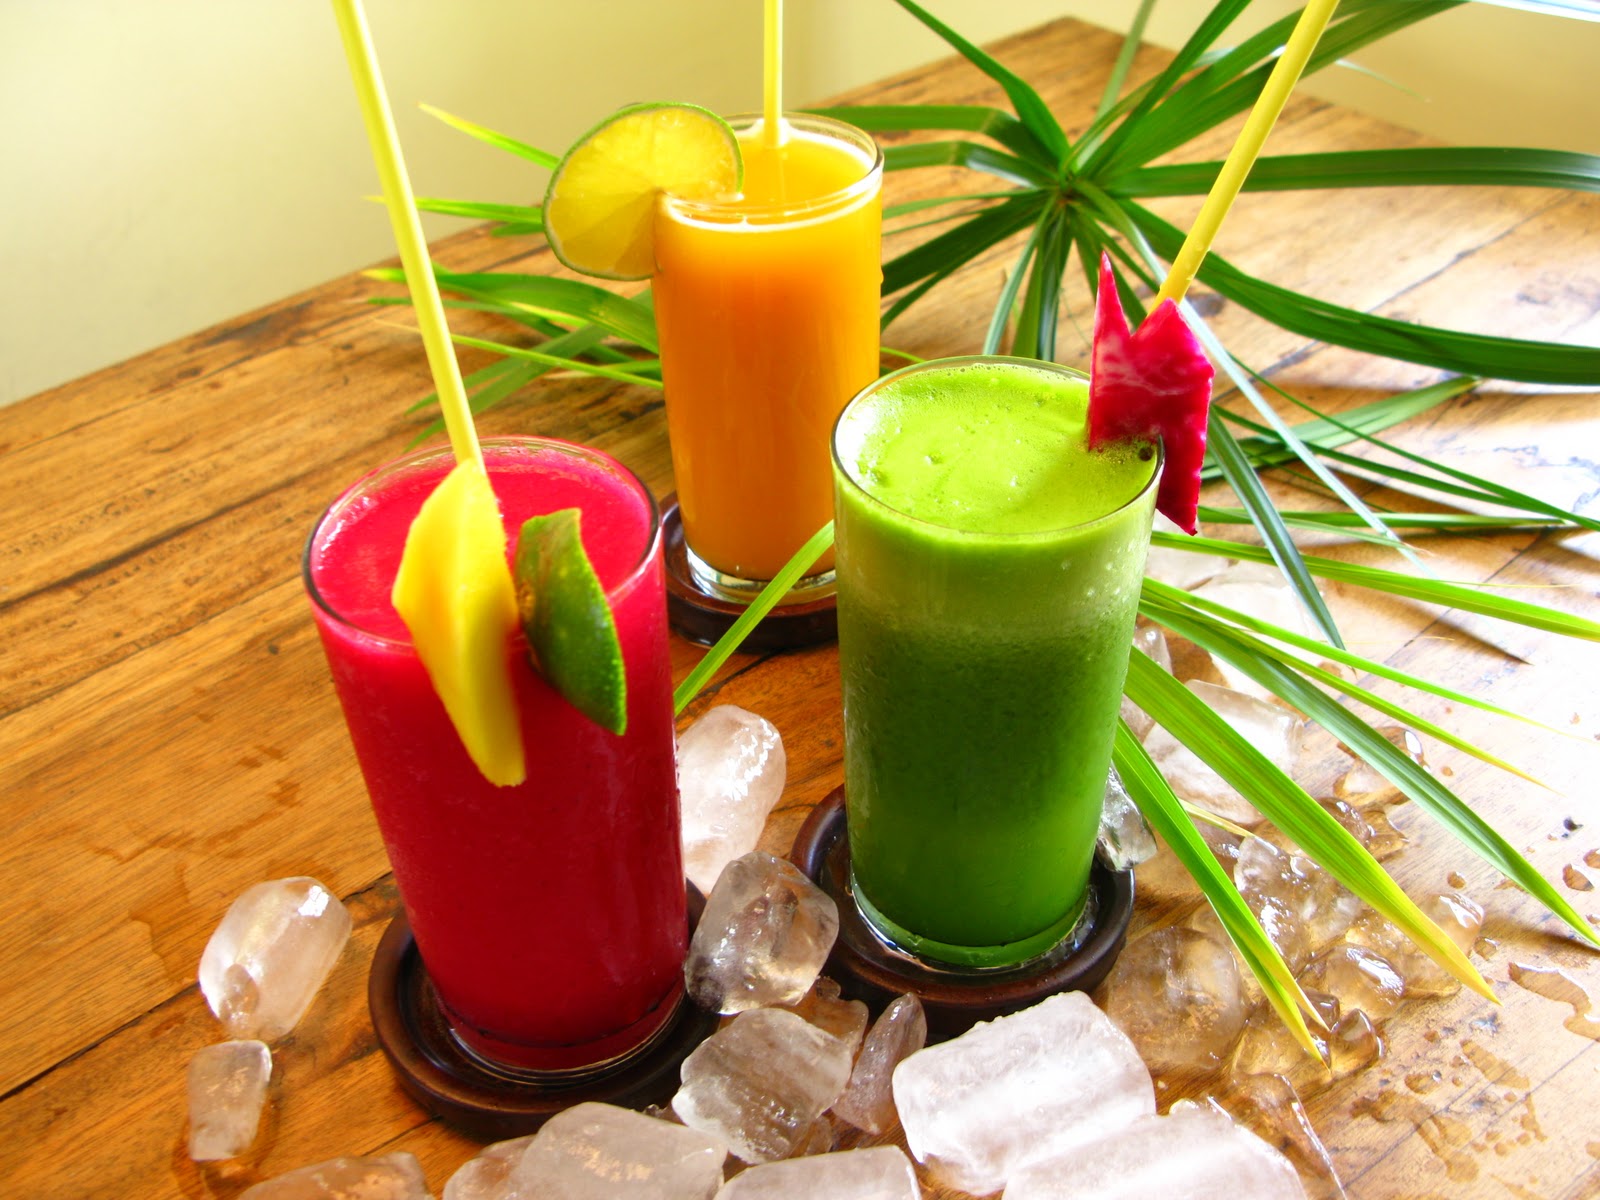 Flavors of Brazil: New Juice Combos for Brazilian Dog Days